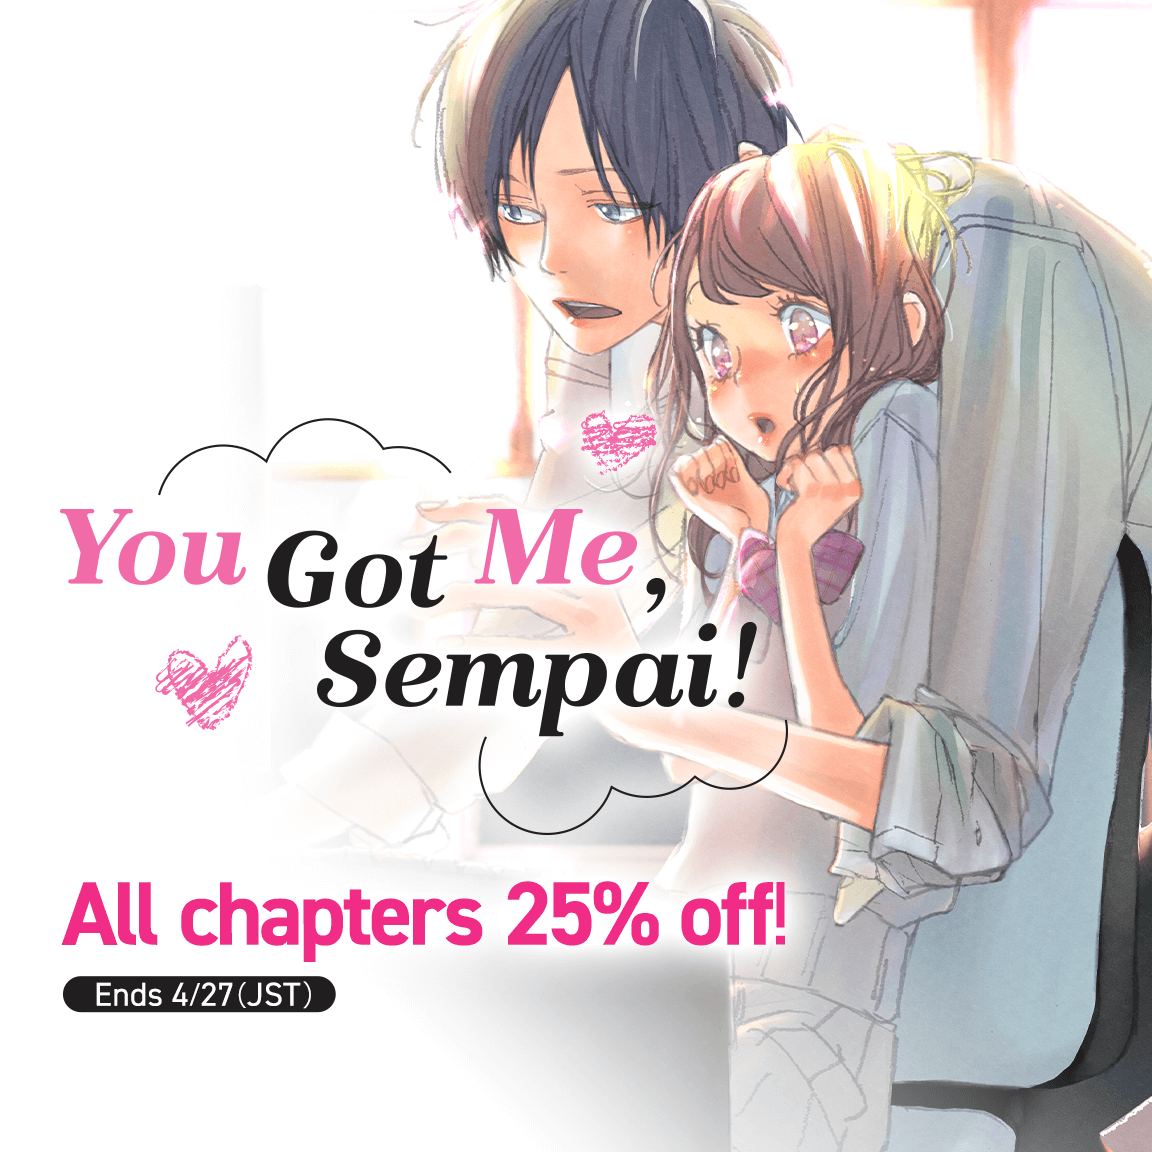 If you've never read this school romance story, now is your chance to get into You Got Me, Sempai! ALL chapters are 25% OFF!✨ 💌Read Chapters 1-4 FREE here: s.kmanga.kodansha.com/ldg?t=10405 Become a member to read the entire series, except for the last 6 chapters for FREE on K MANGA!